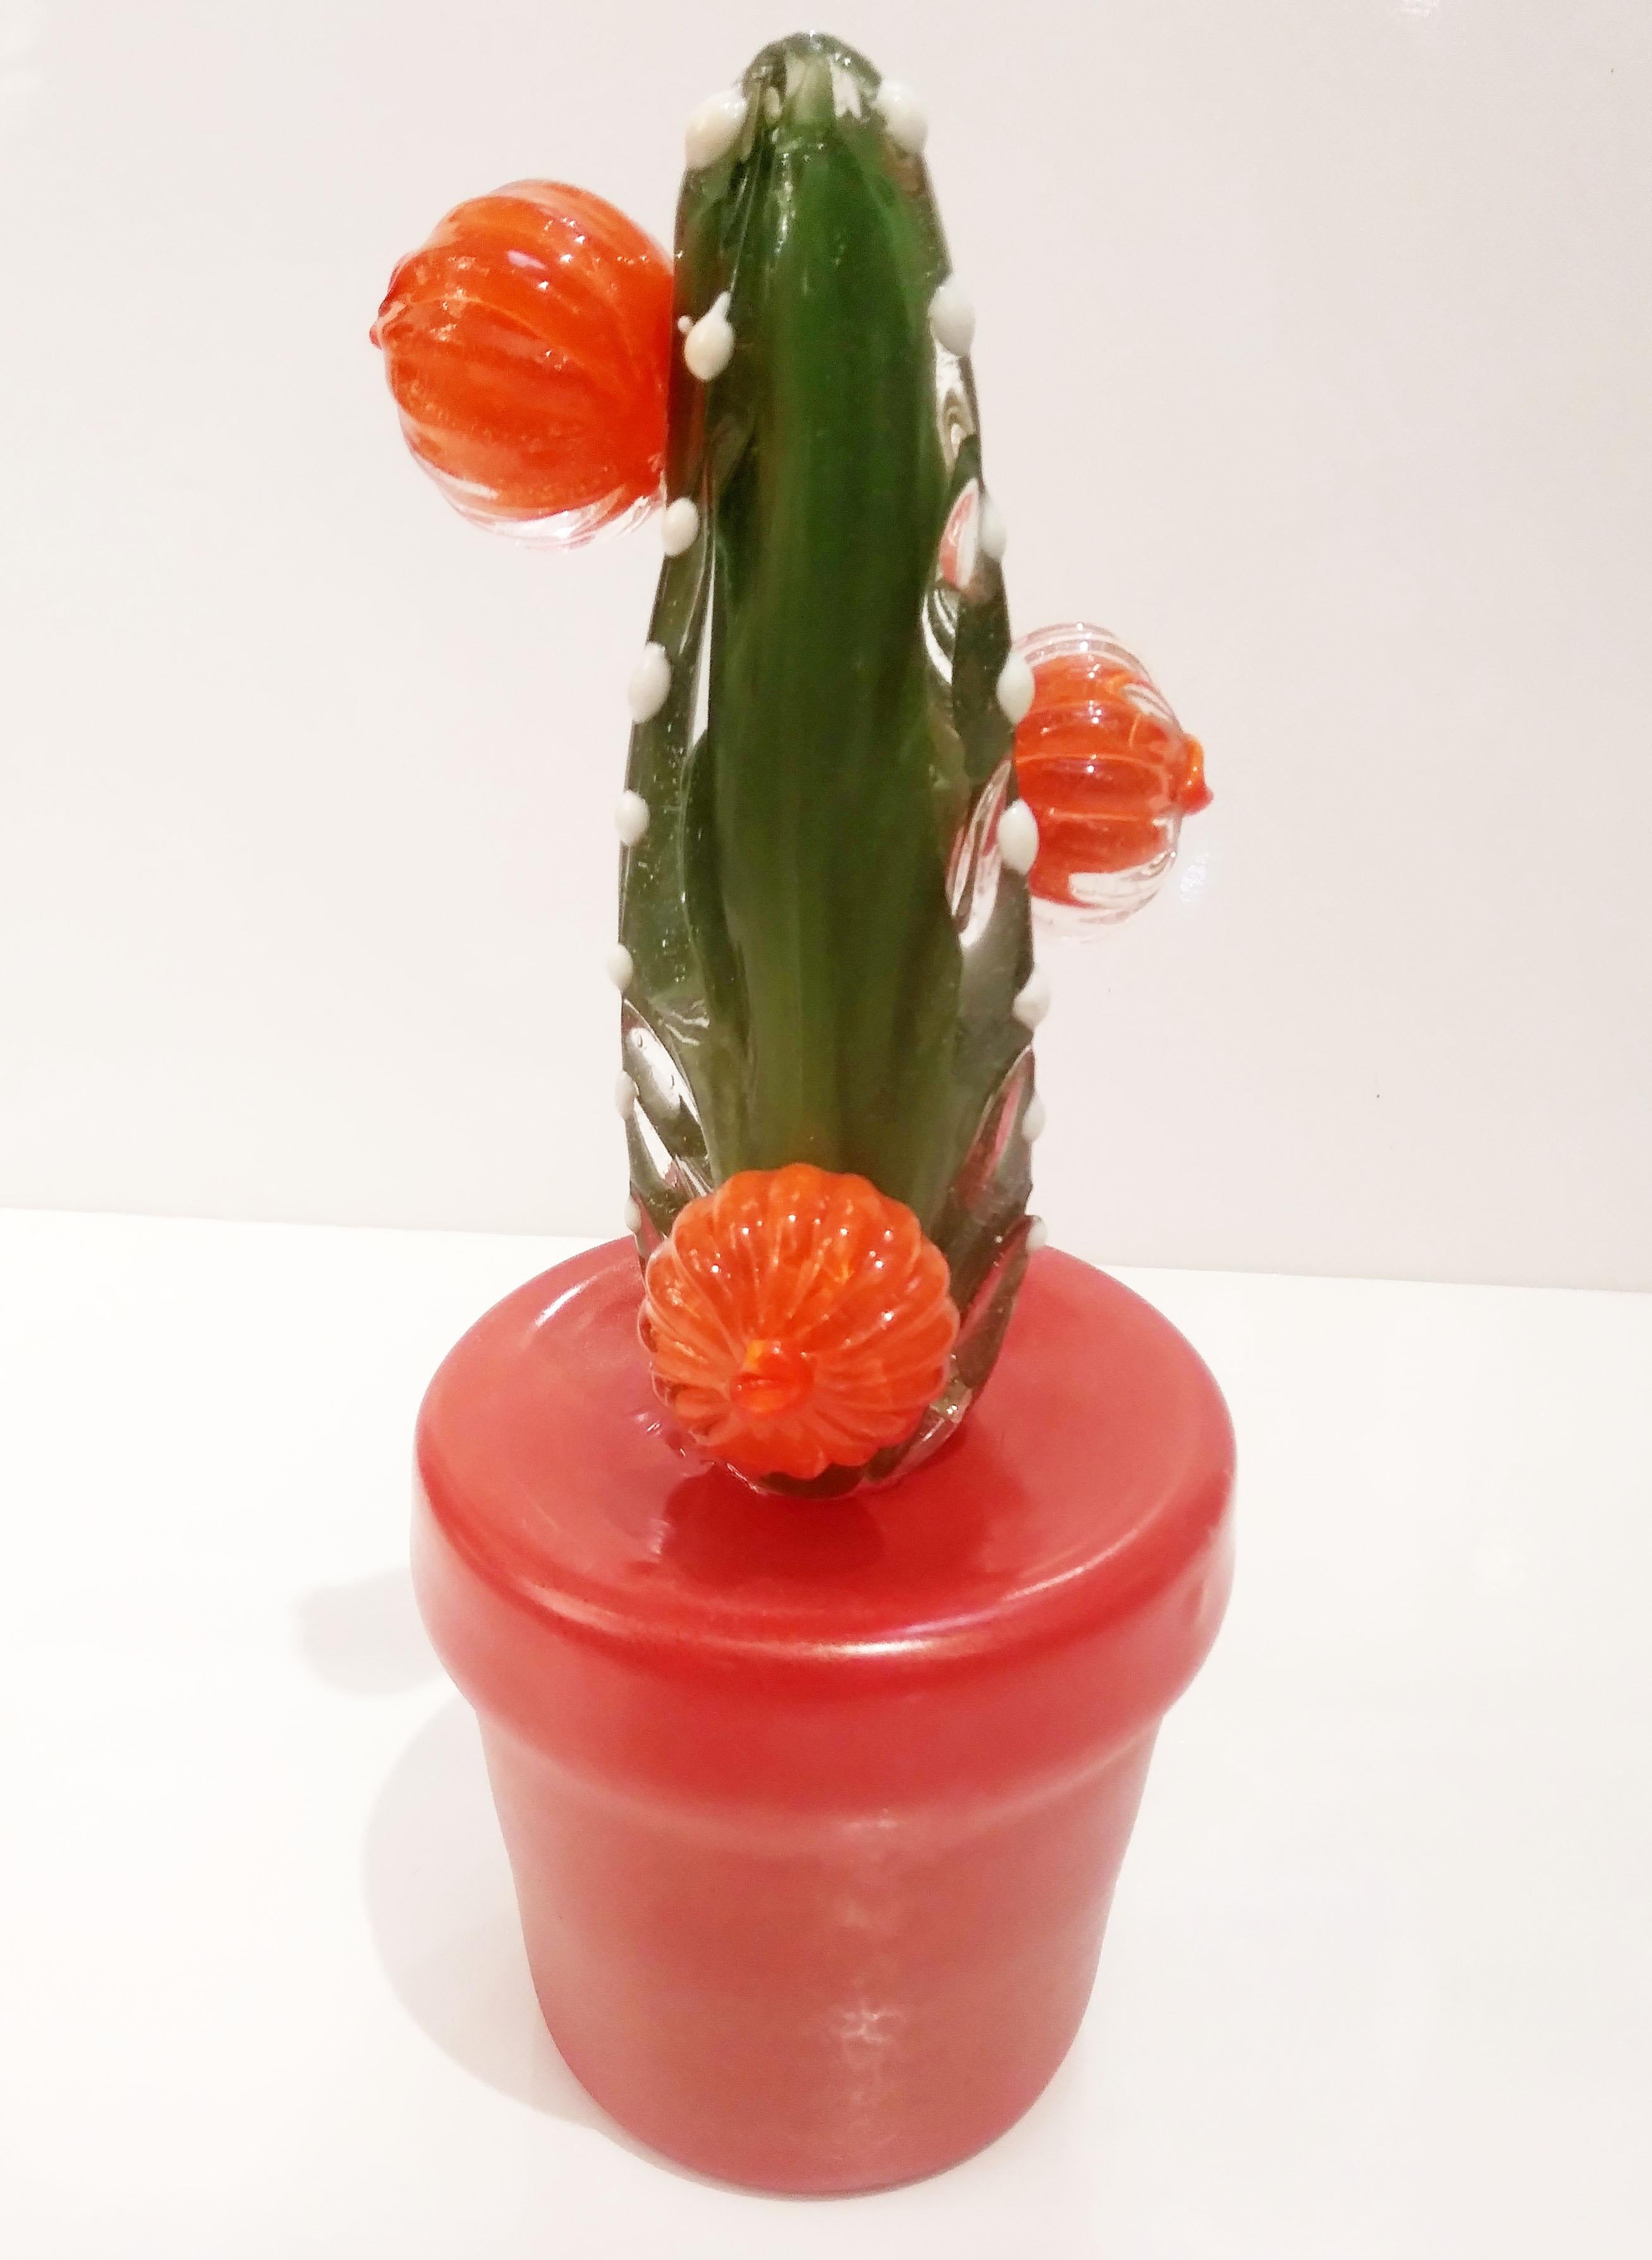 Contemporary Italian highly collectible potted glass cactus of limited edition, entirely handcrafted in Murano, with modern Minimalist design blown by Fornace Mian, in a lifelike organic modernist shape in overlaid grass green Murano glass